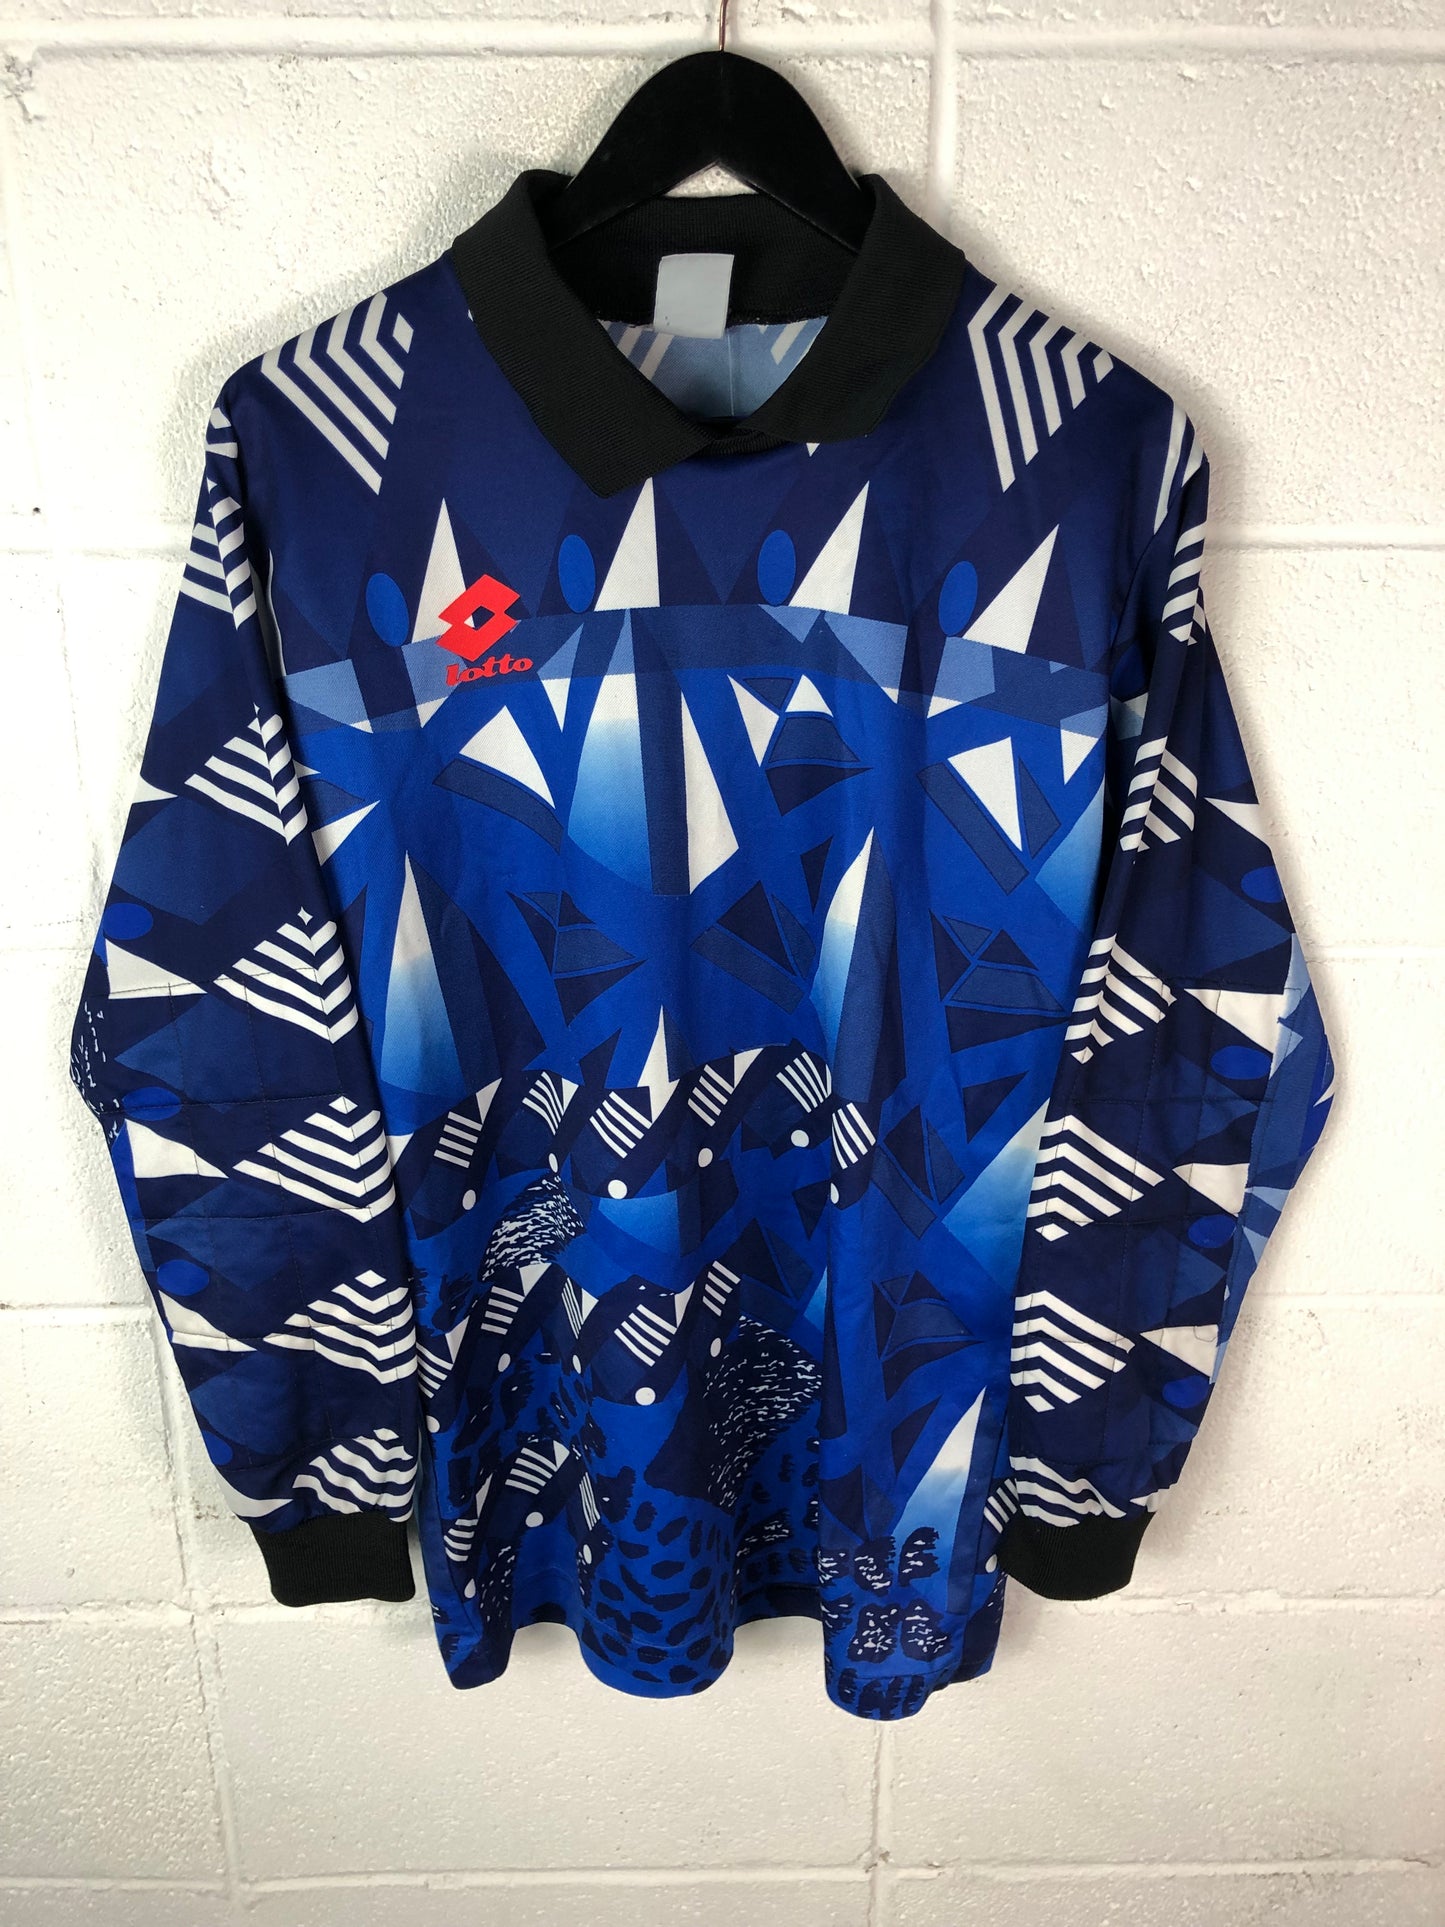 VTG Lotto Collared Goalkeeper L/S Soccer Jersey Sz M